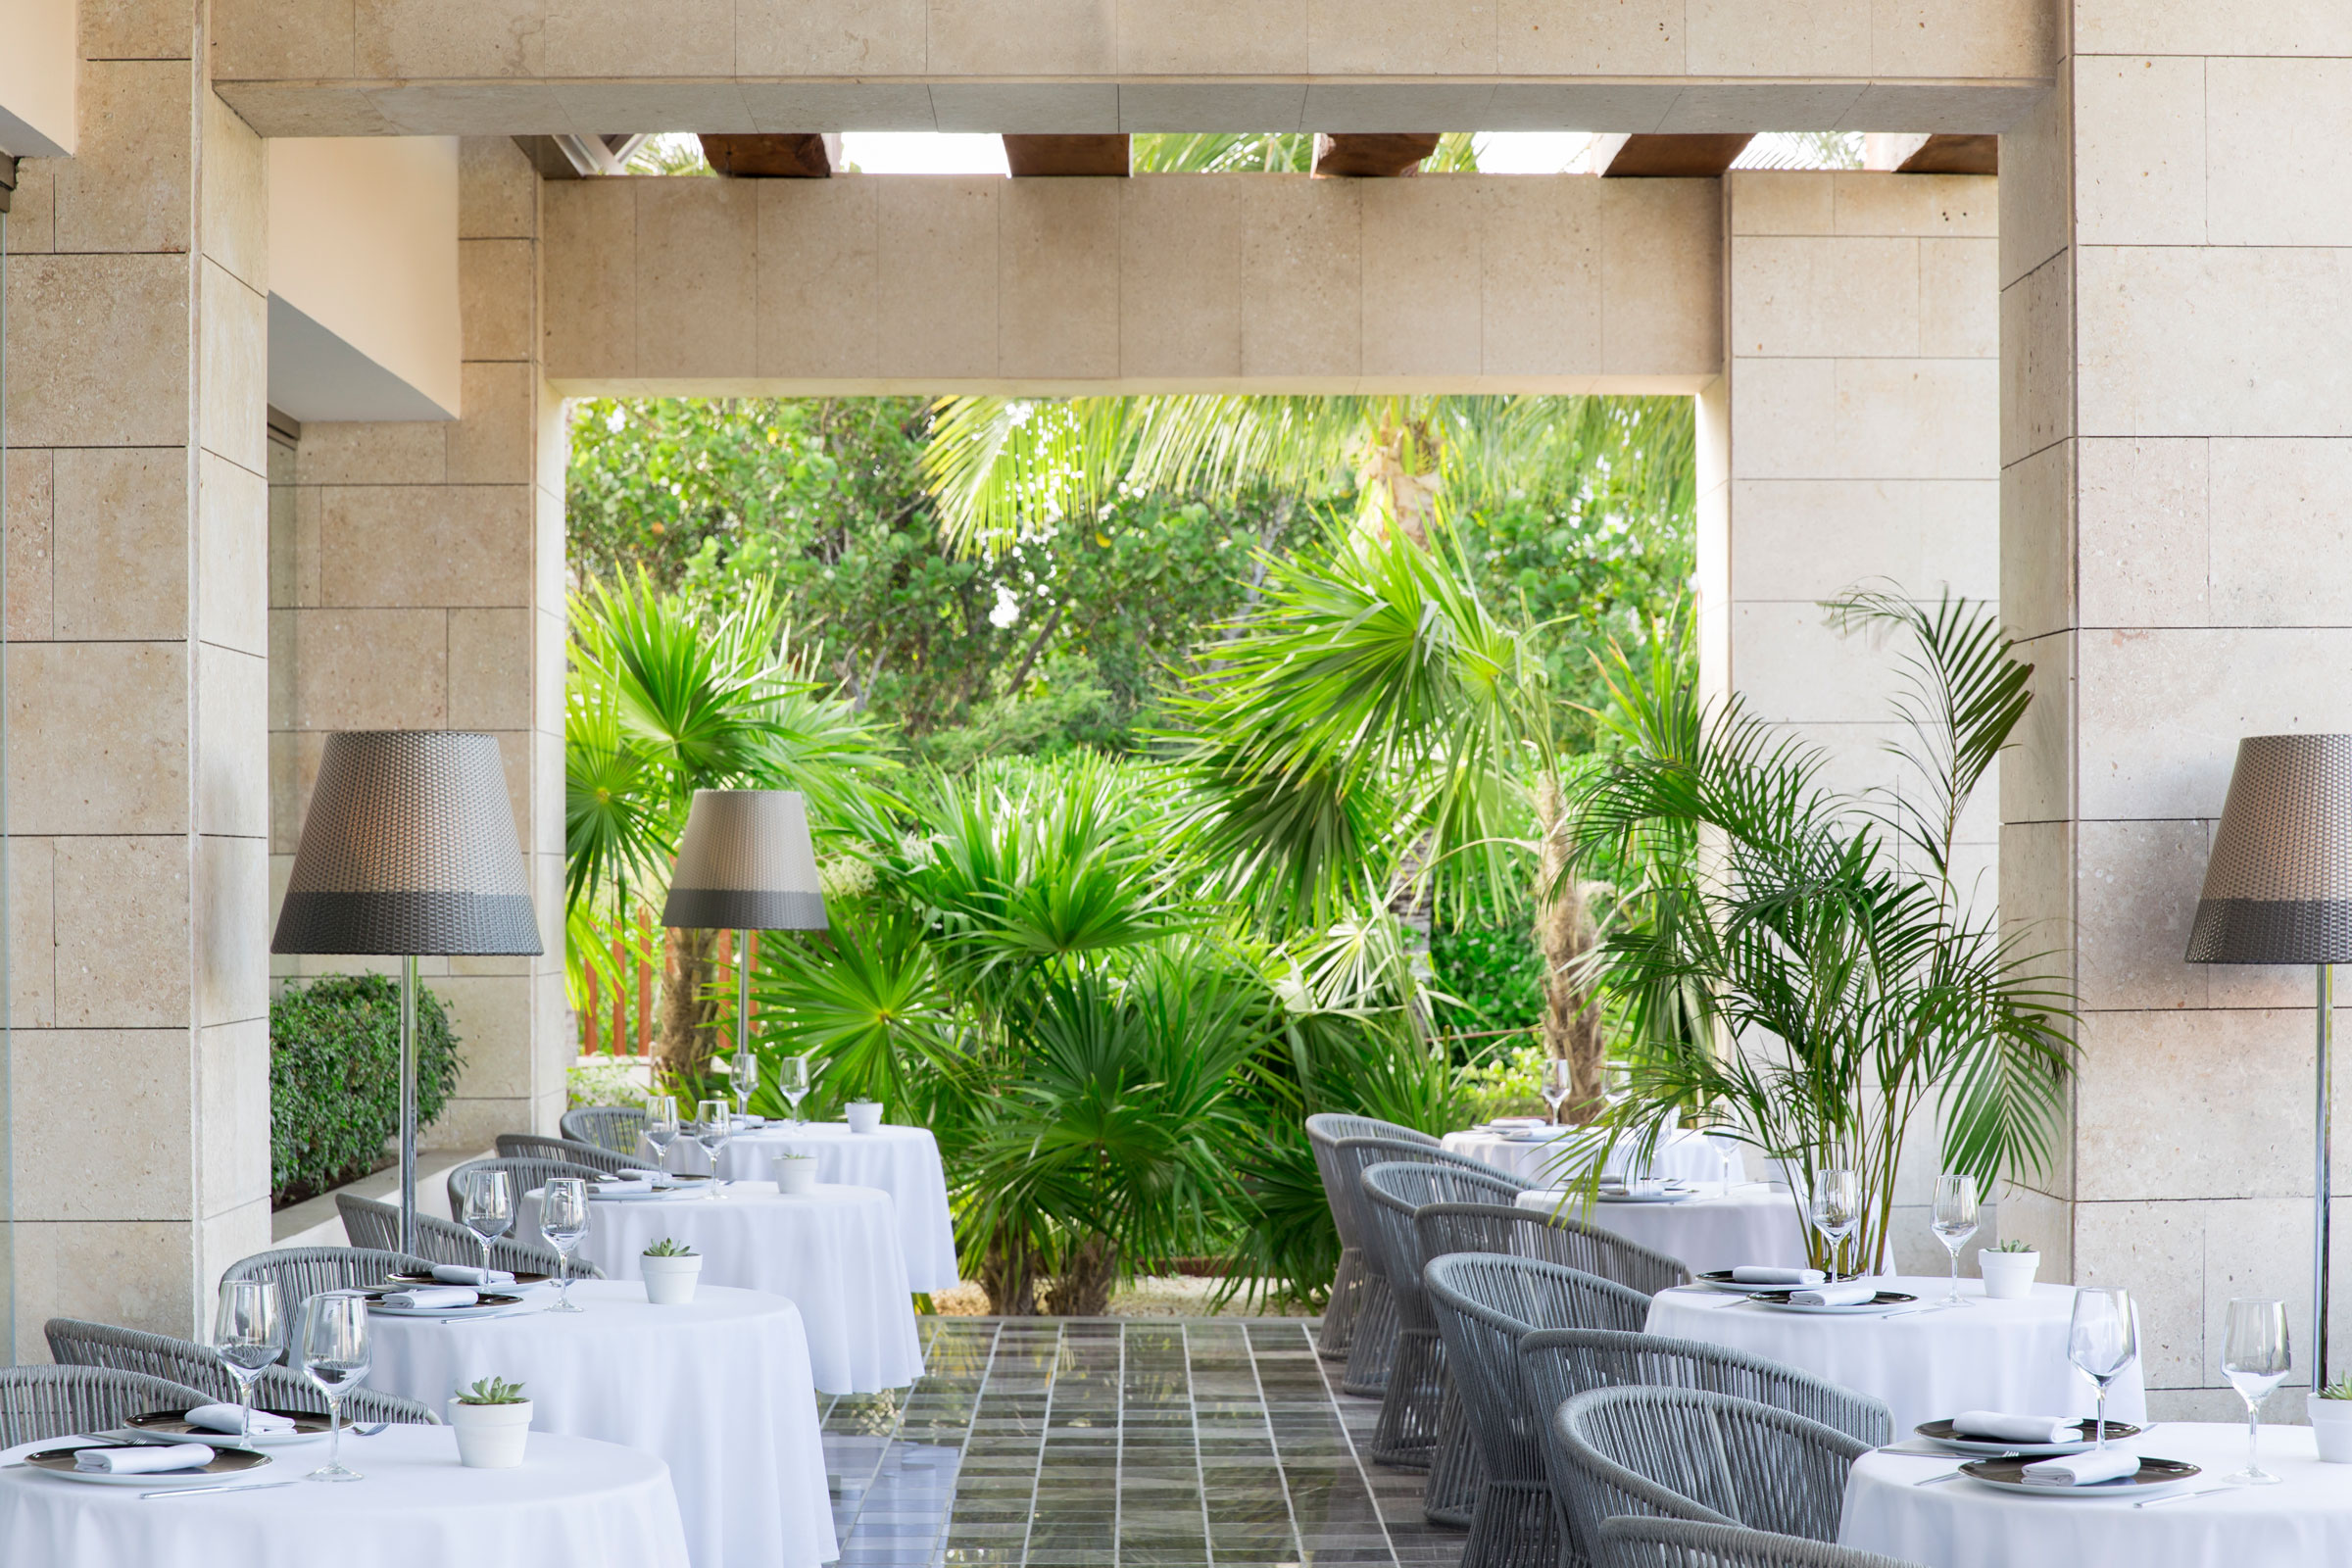 Restaurant Le Bisou contemporary style of French cuisine at Beloved Playa Mujeres